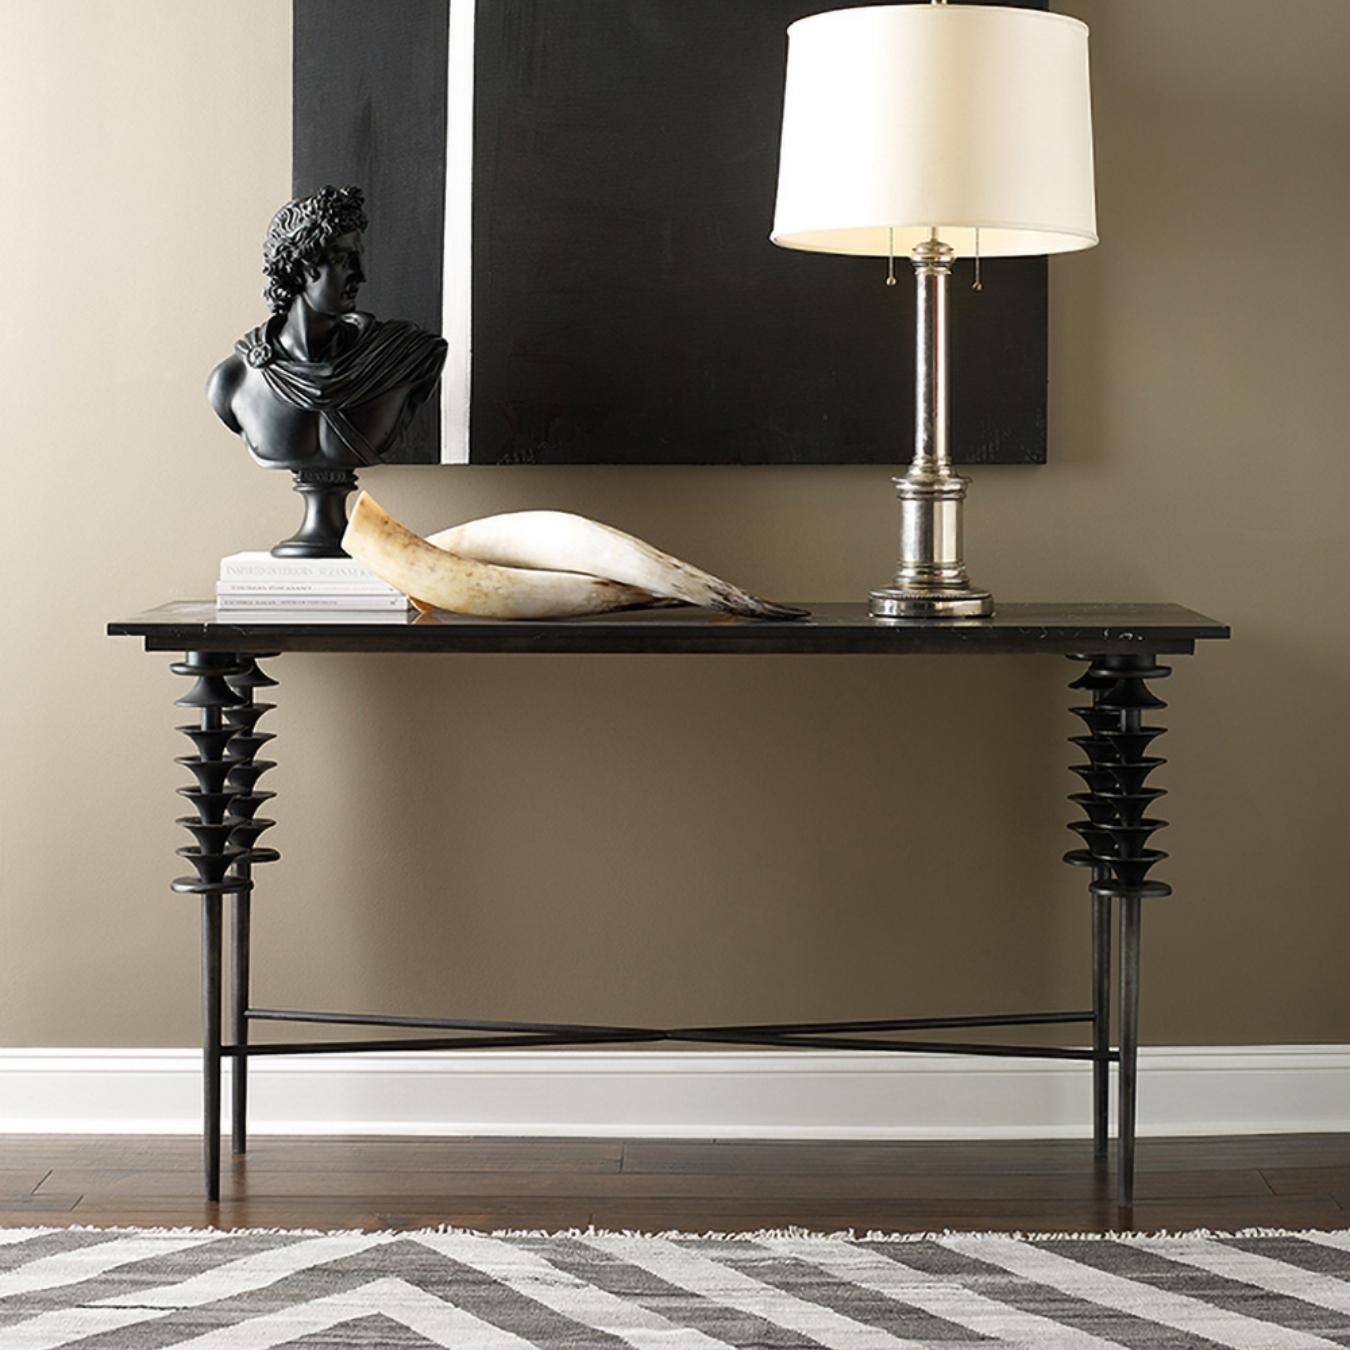 This metal console has legs made by joining various distinctly shaped pieces. Its tabletop is made from black Monterrey marble and the elegant base is made of metal.
 